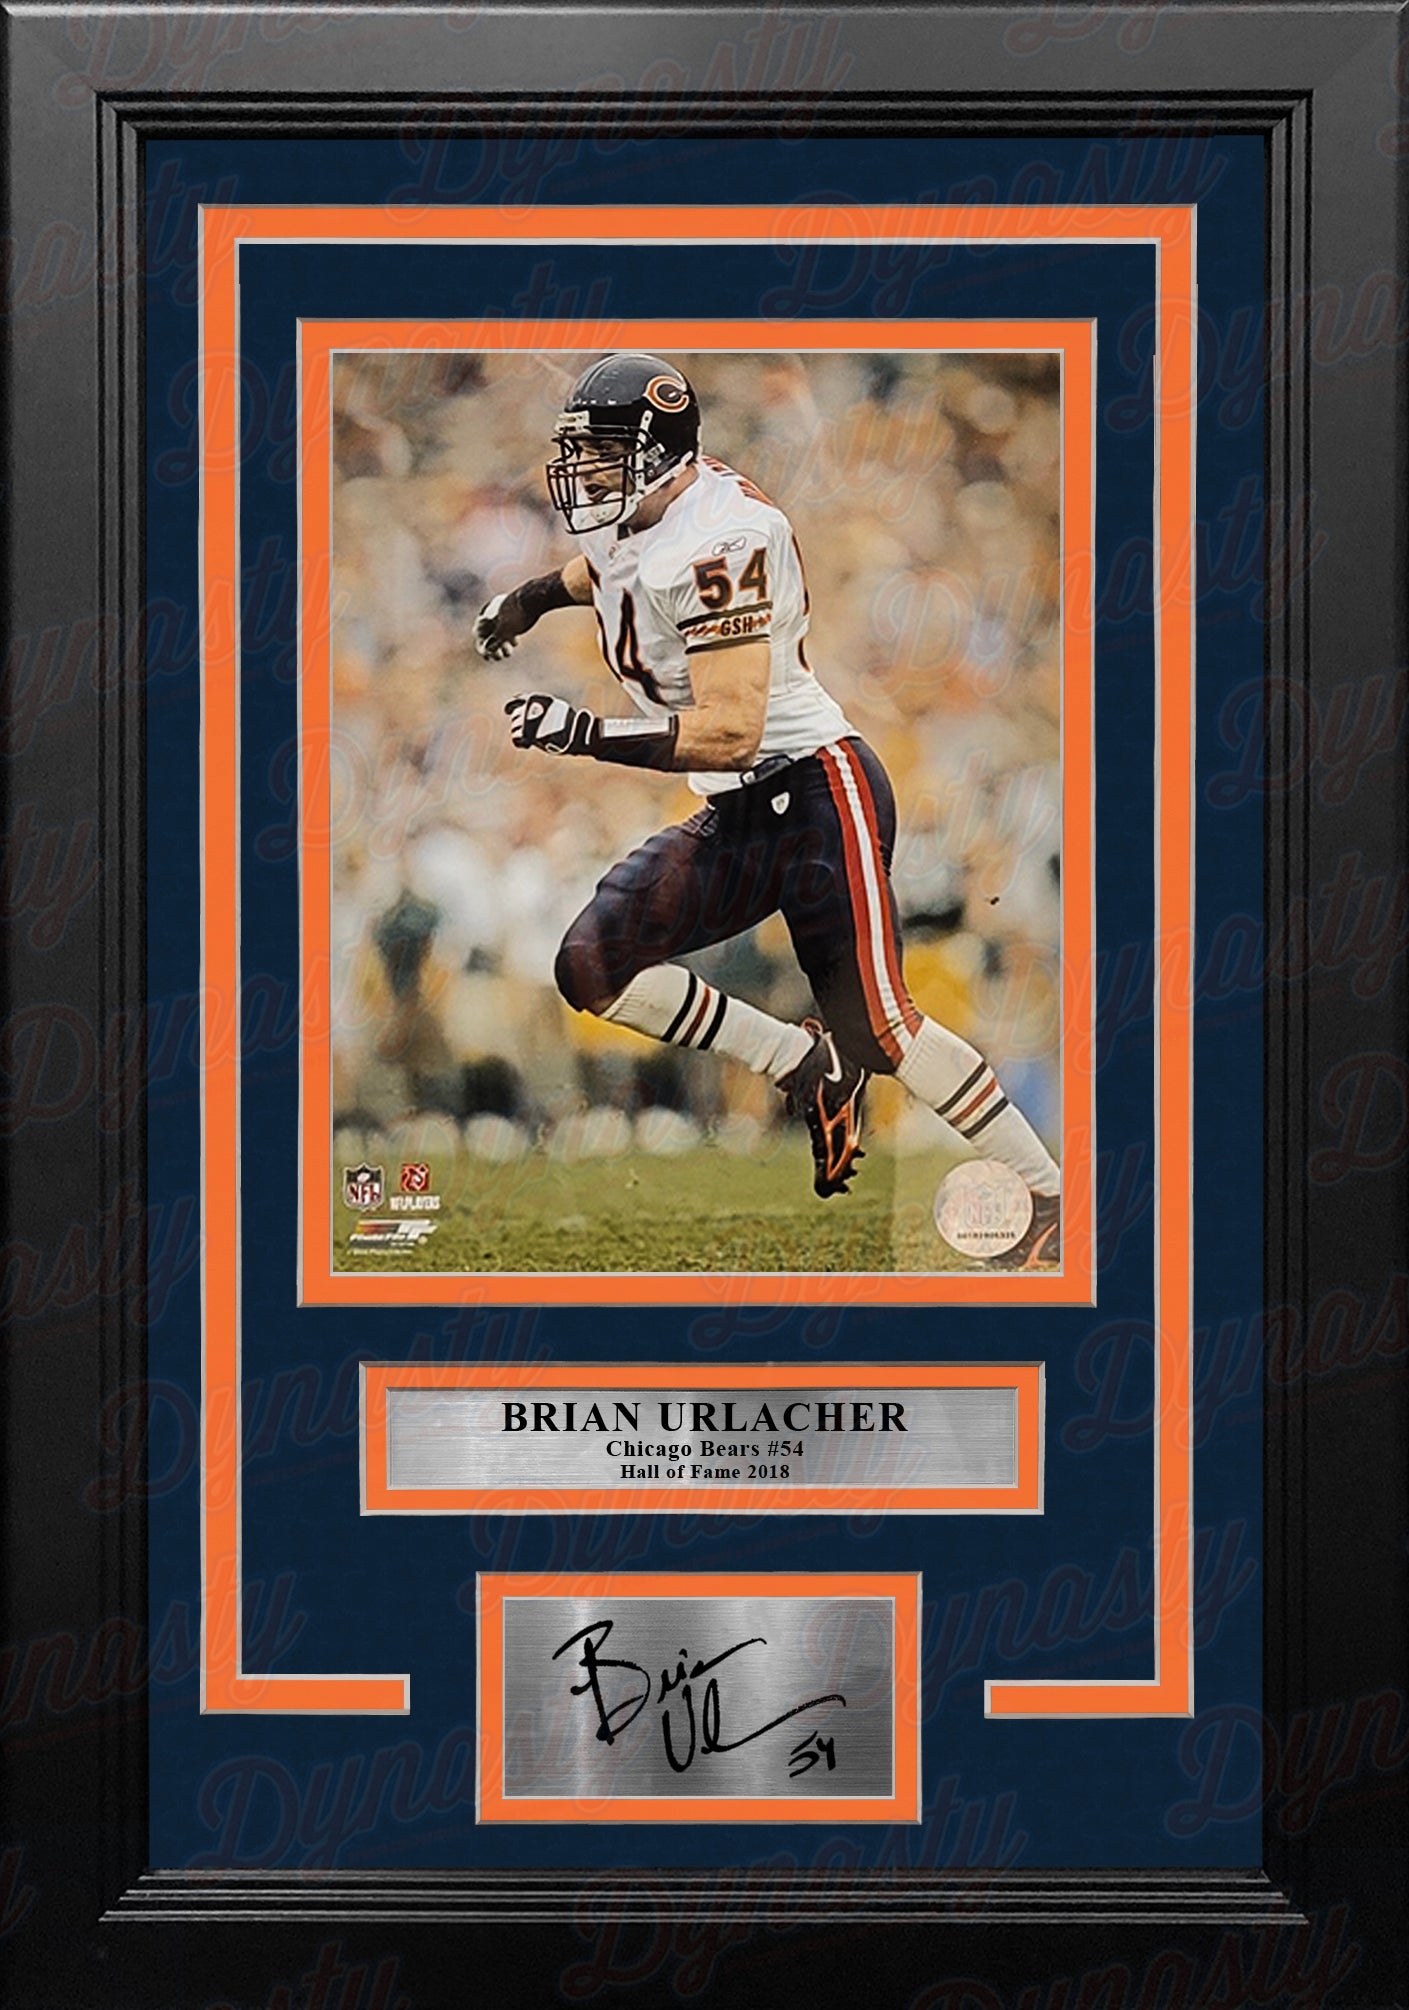 Brian Urlacher in Action Chicago Bears 8' x 10' Framed Football Photo with  Engraved Autograph